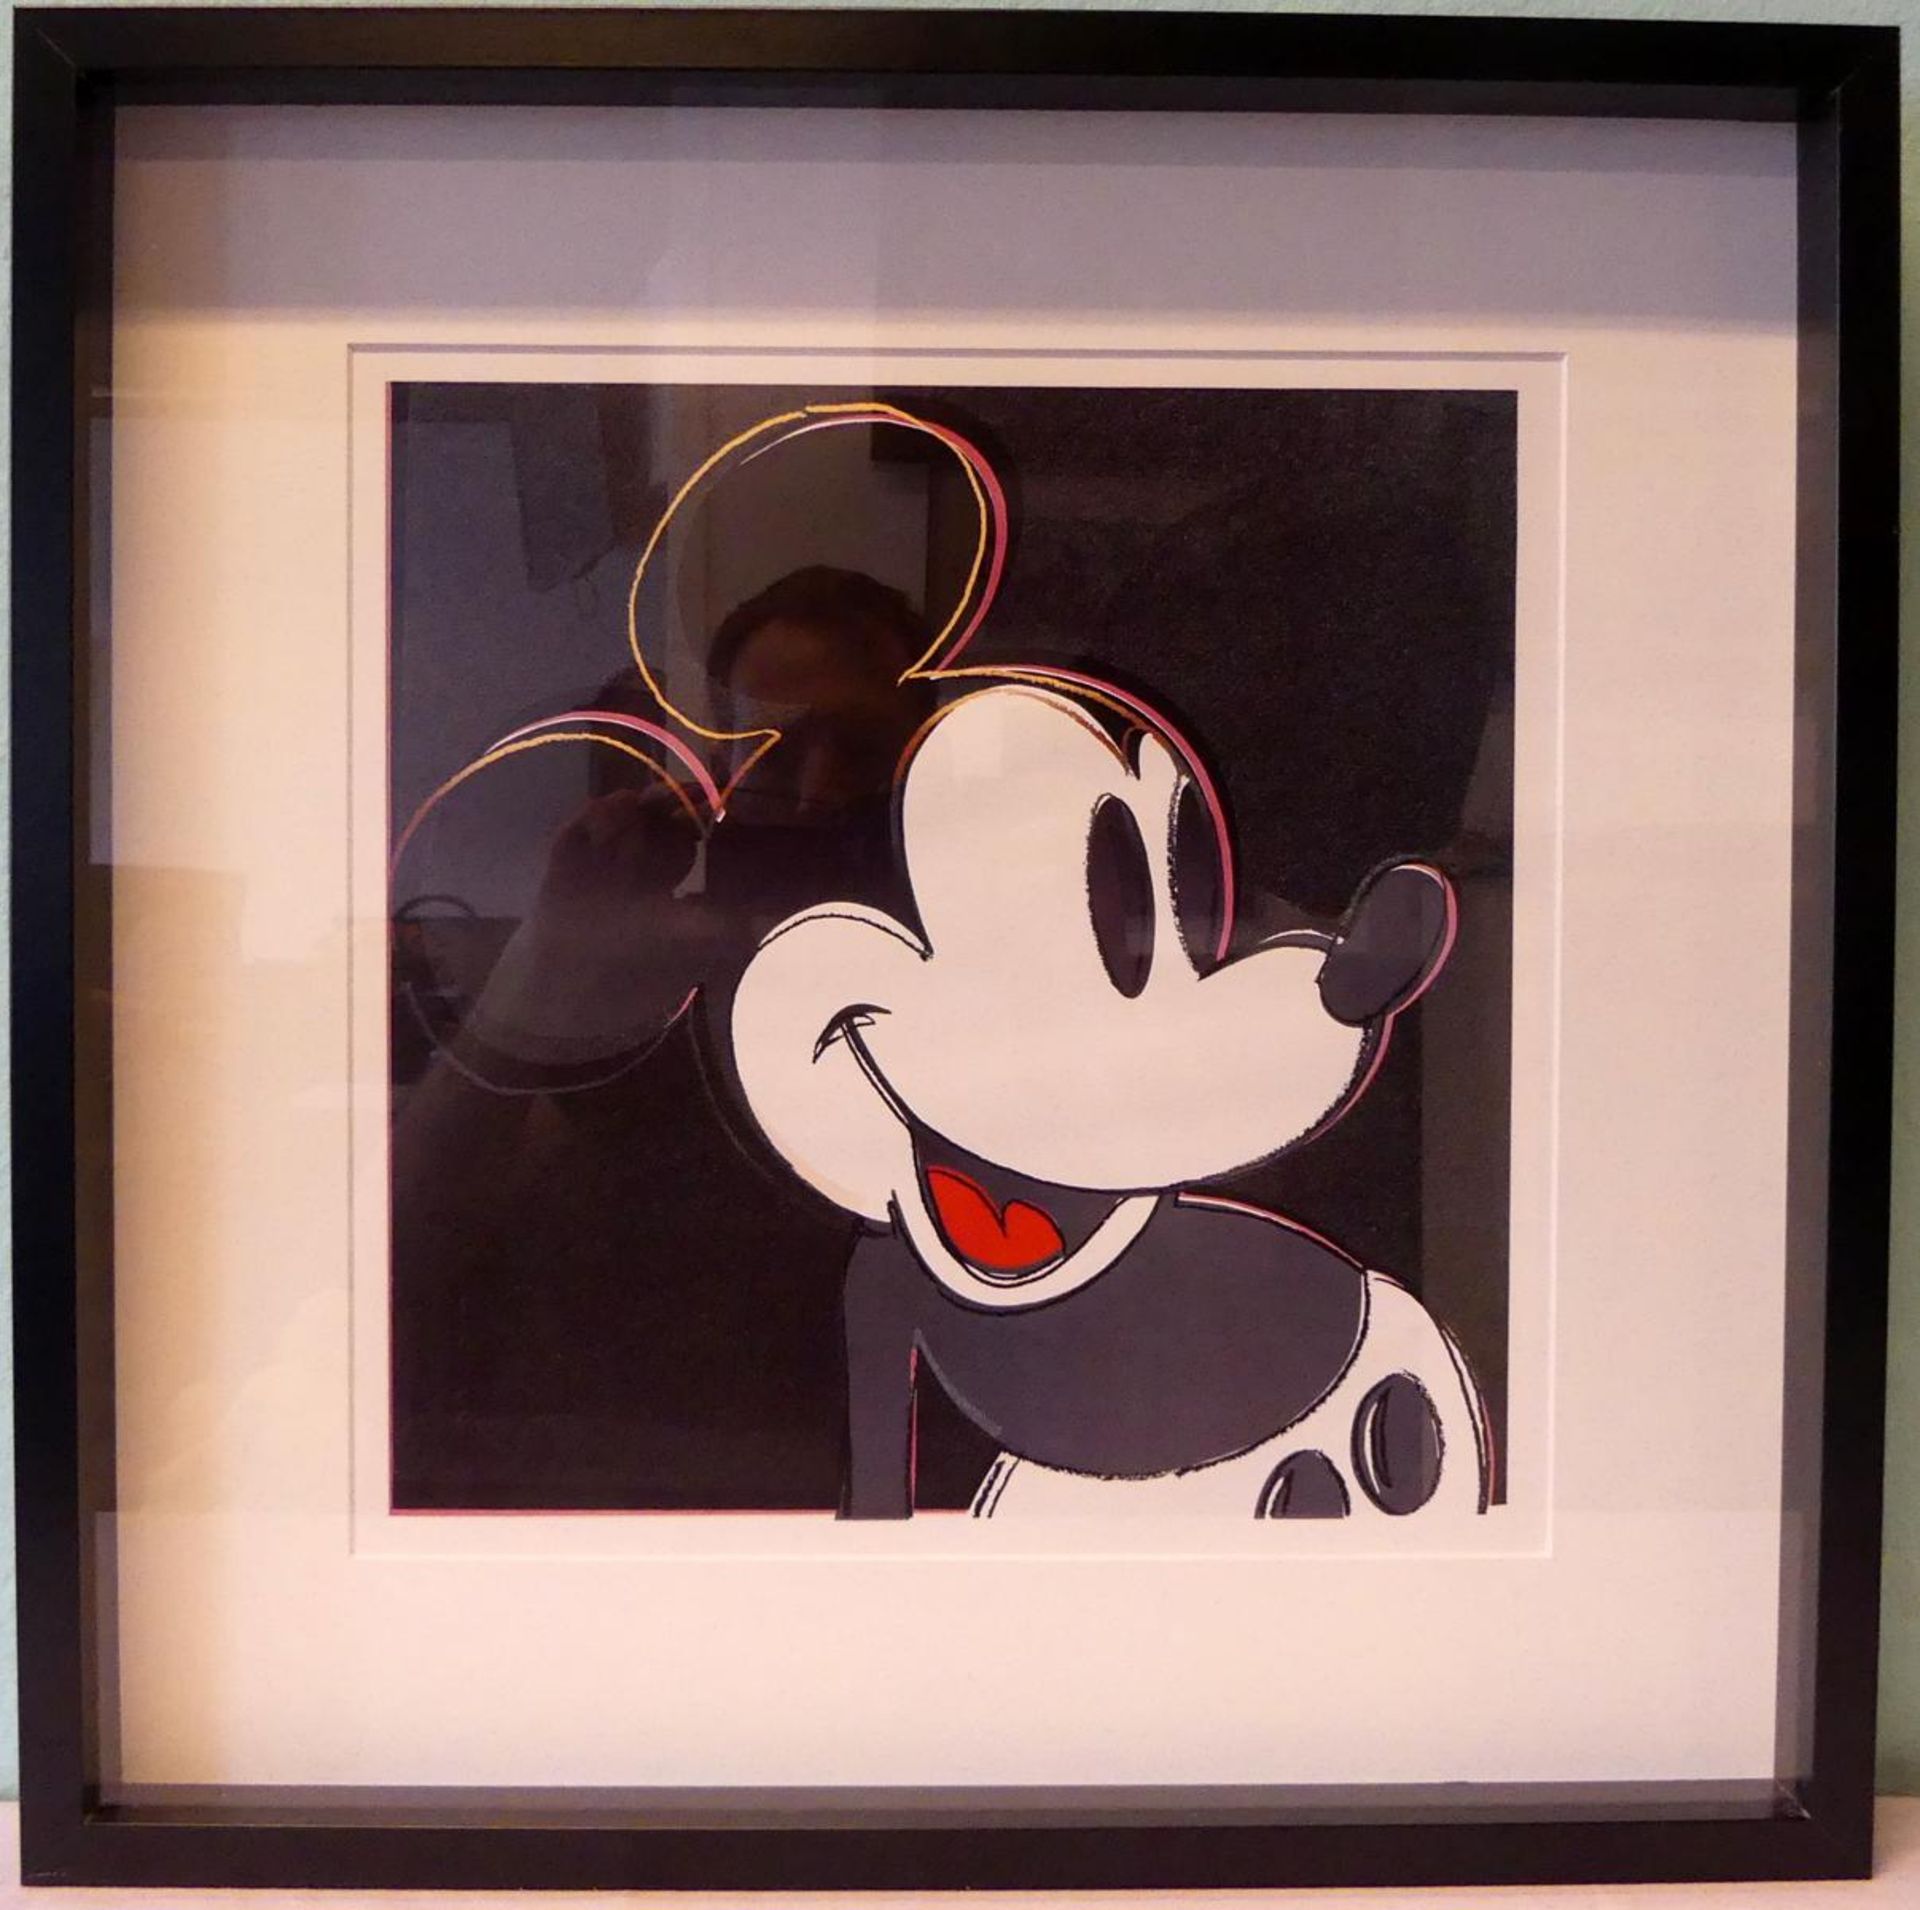 ANDY WARHOL (1928-1987), "Mickey Mouse", Farboffsetlithographie